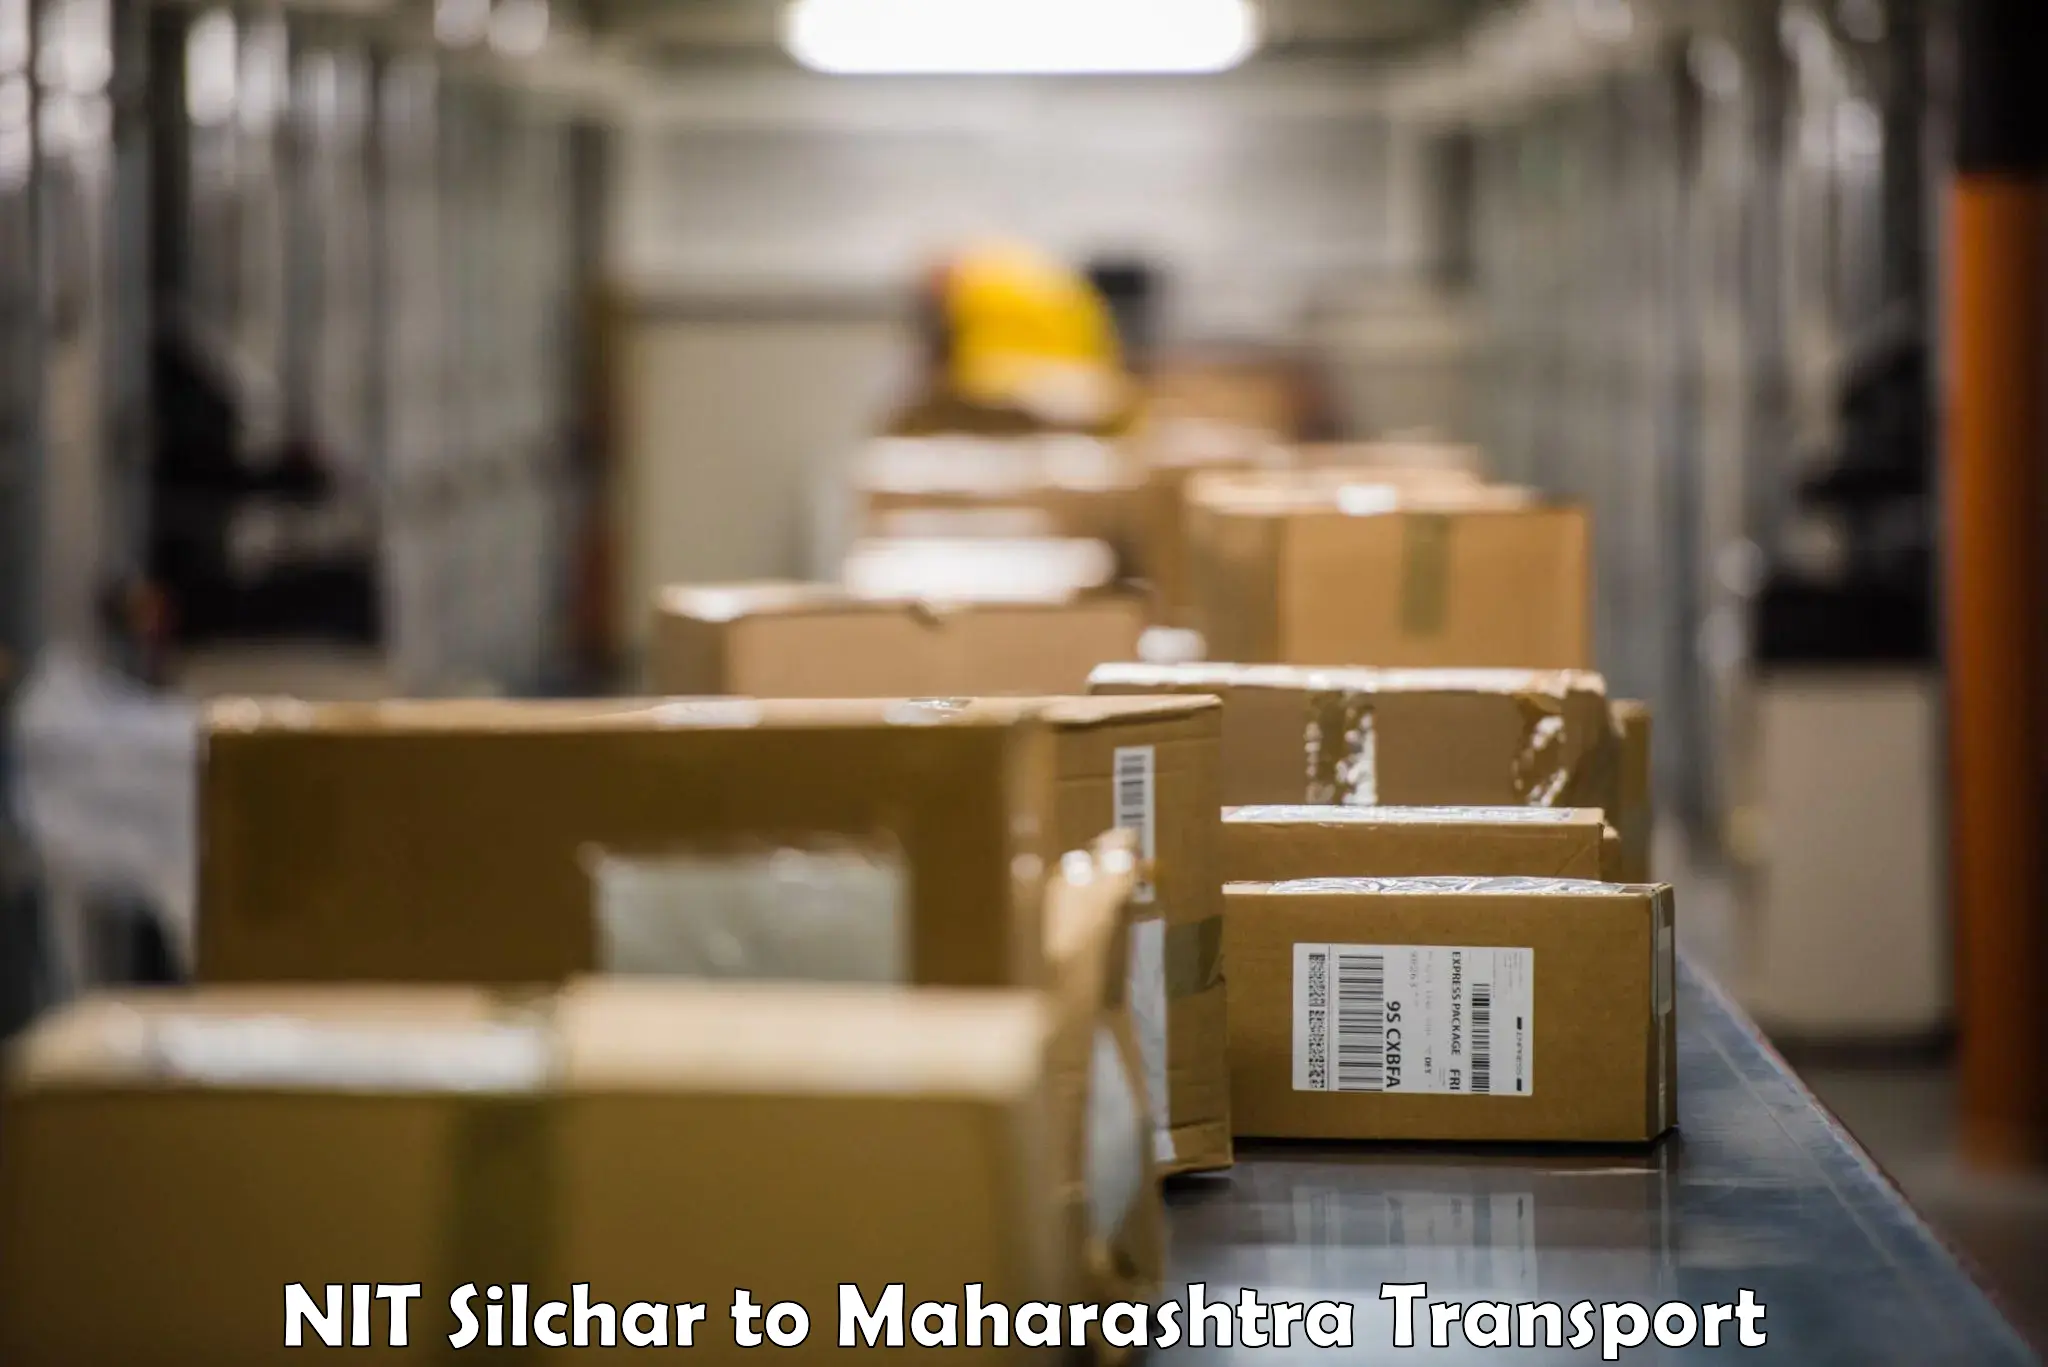 Air freight transport services NIT Silchar to Lonavala